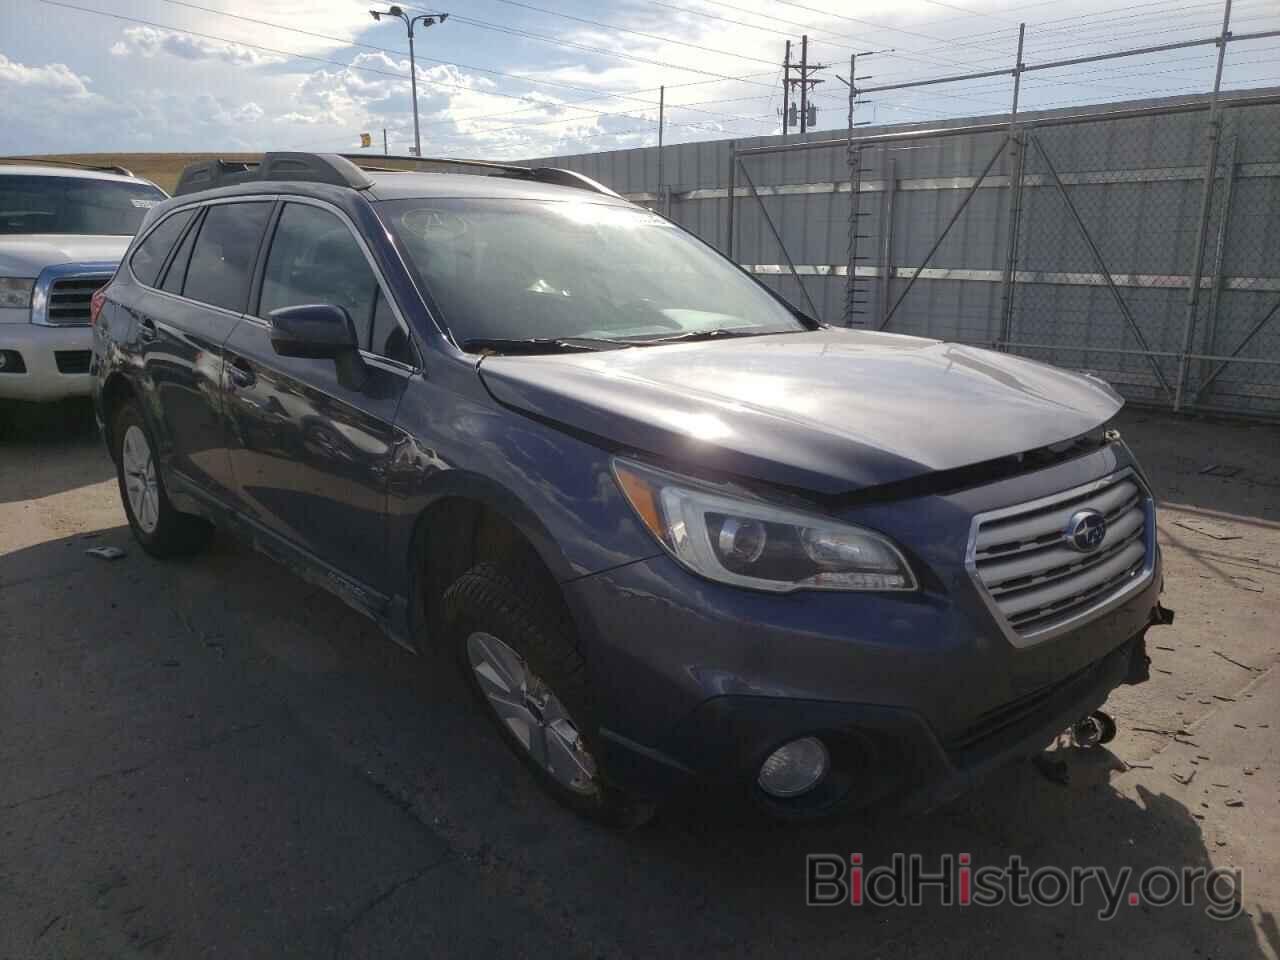 Photo 4S4BSBFCXF3295143 - SUBARU OUTBACK 2015